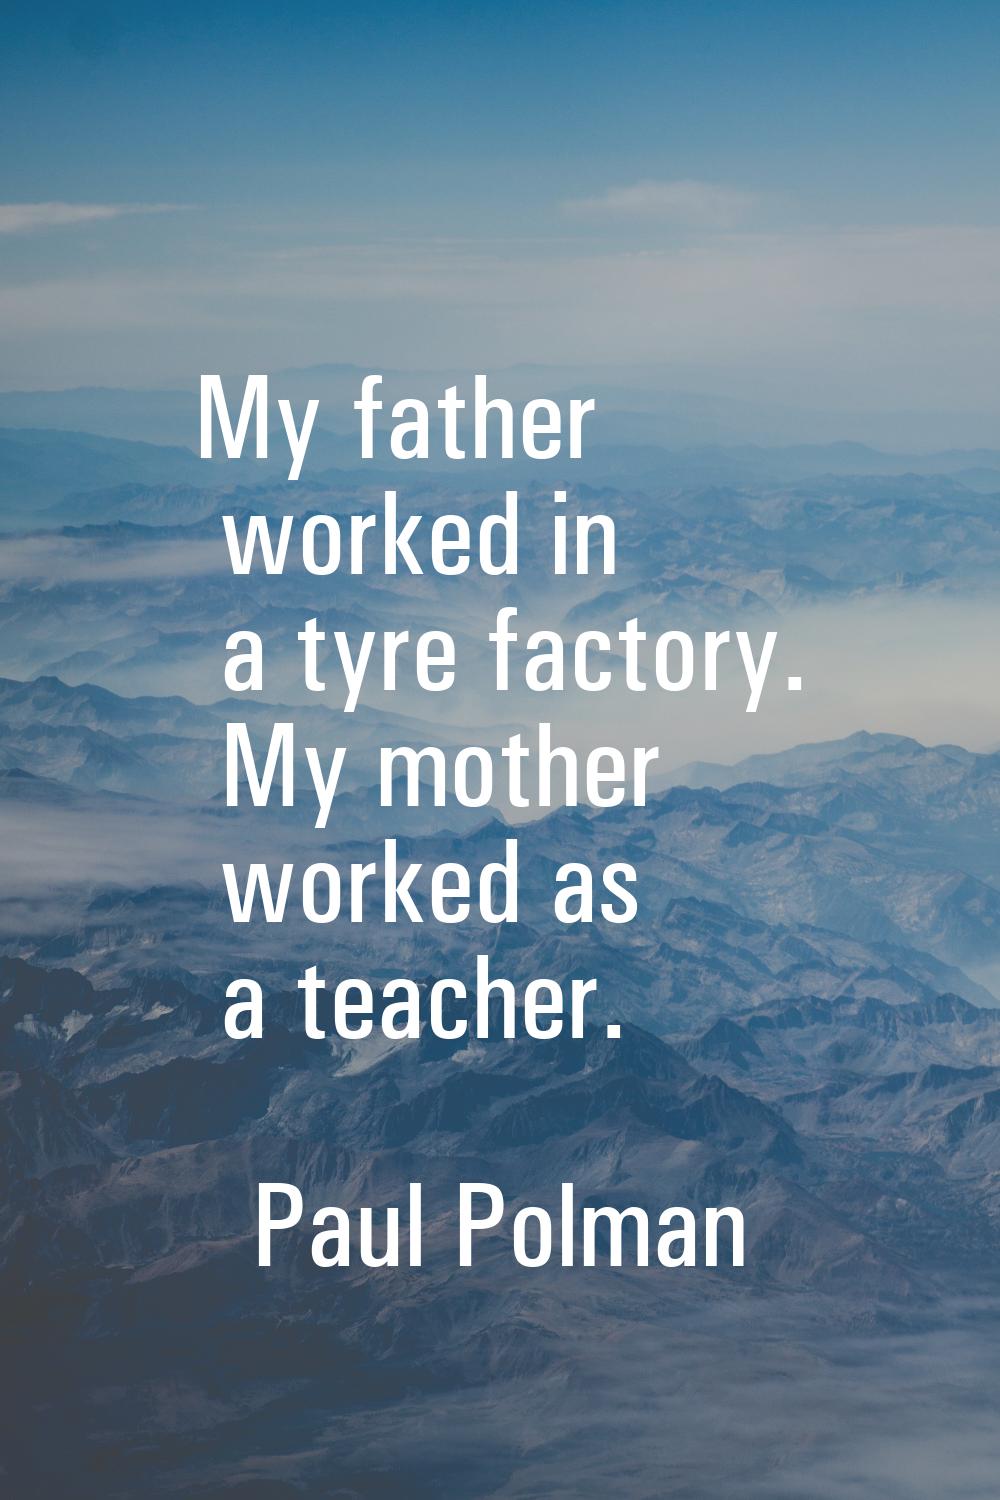 My father worked in a tyre factory. My mother worked as a teacher.